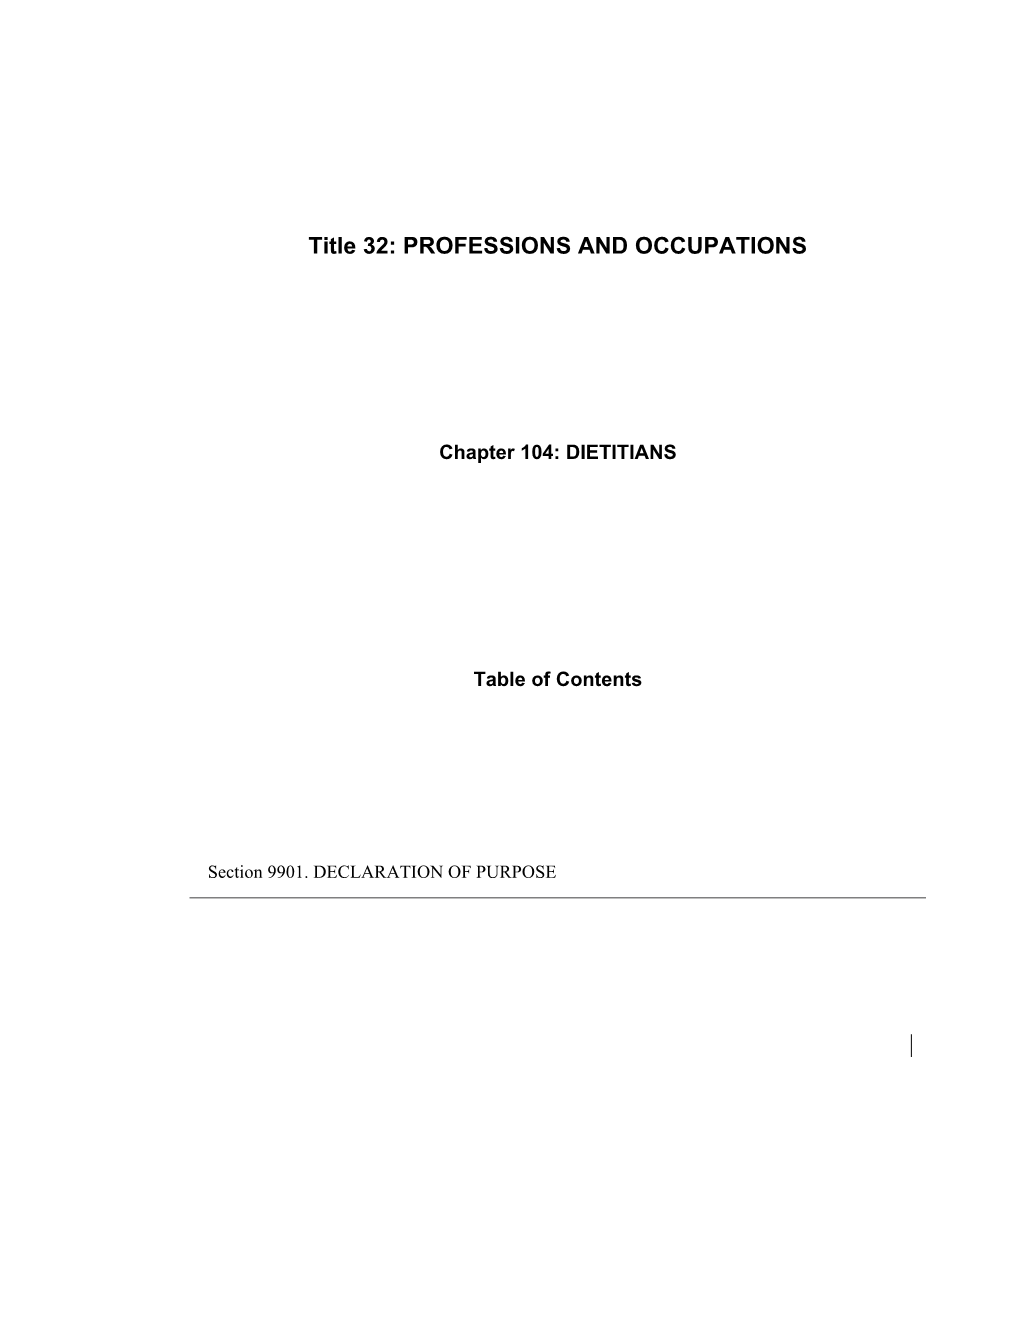 Title 32: PROFESSIONS and OCCUPATIONS